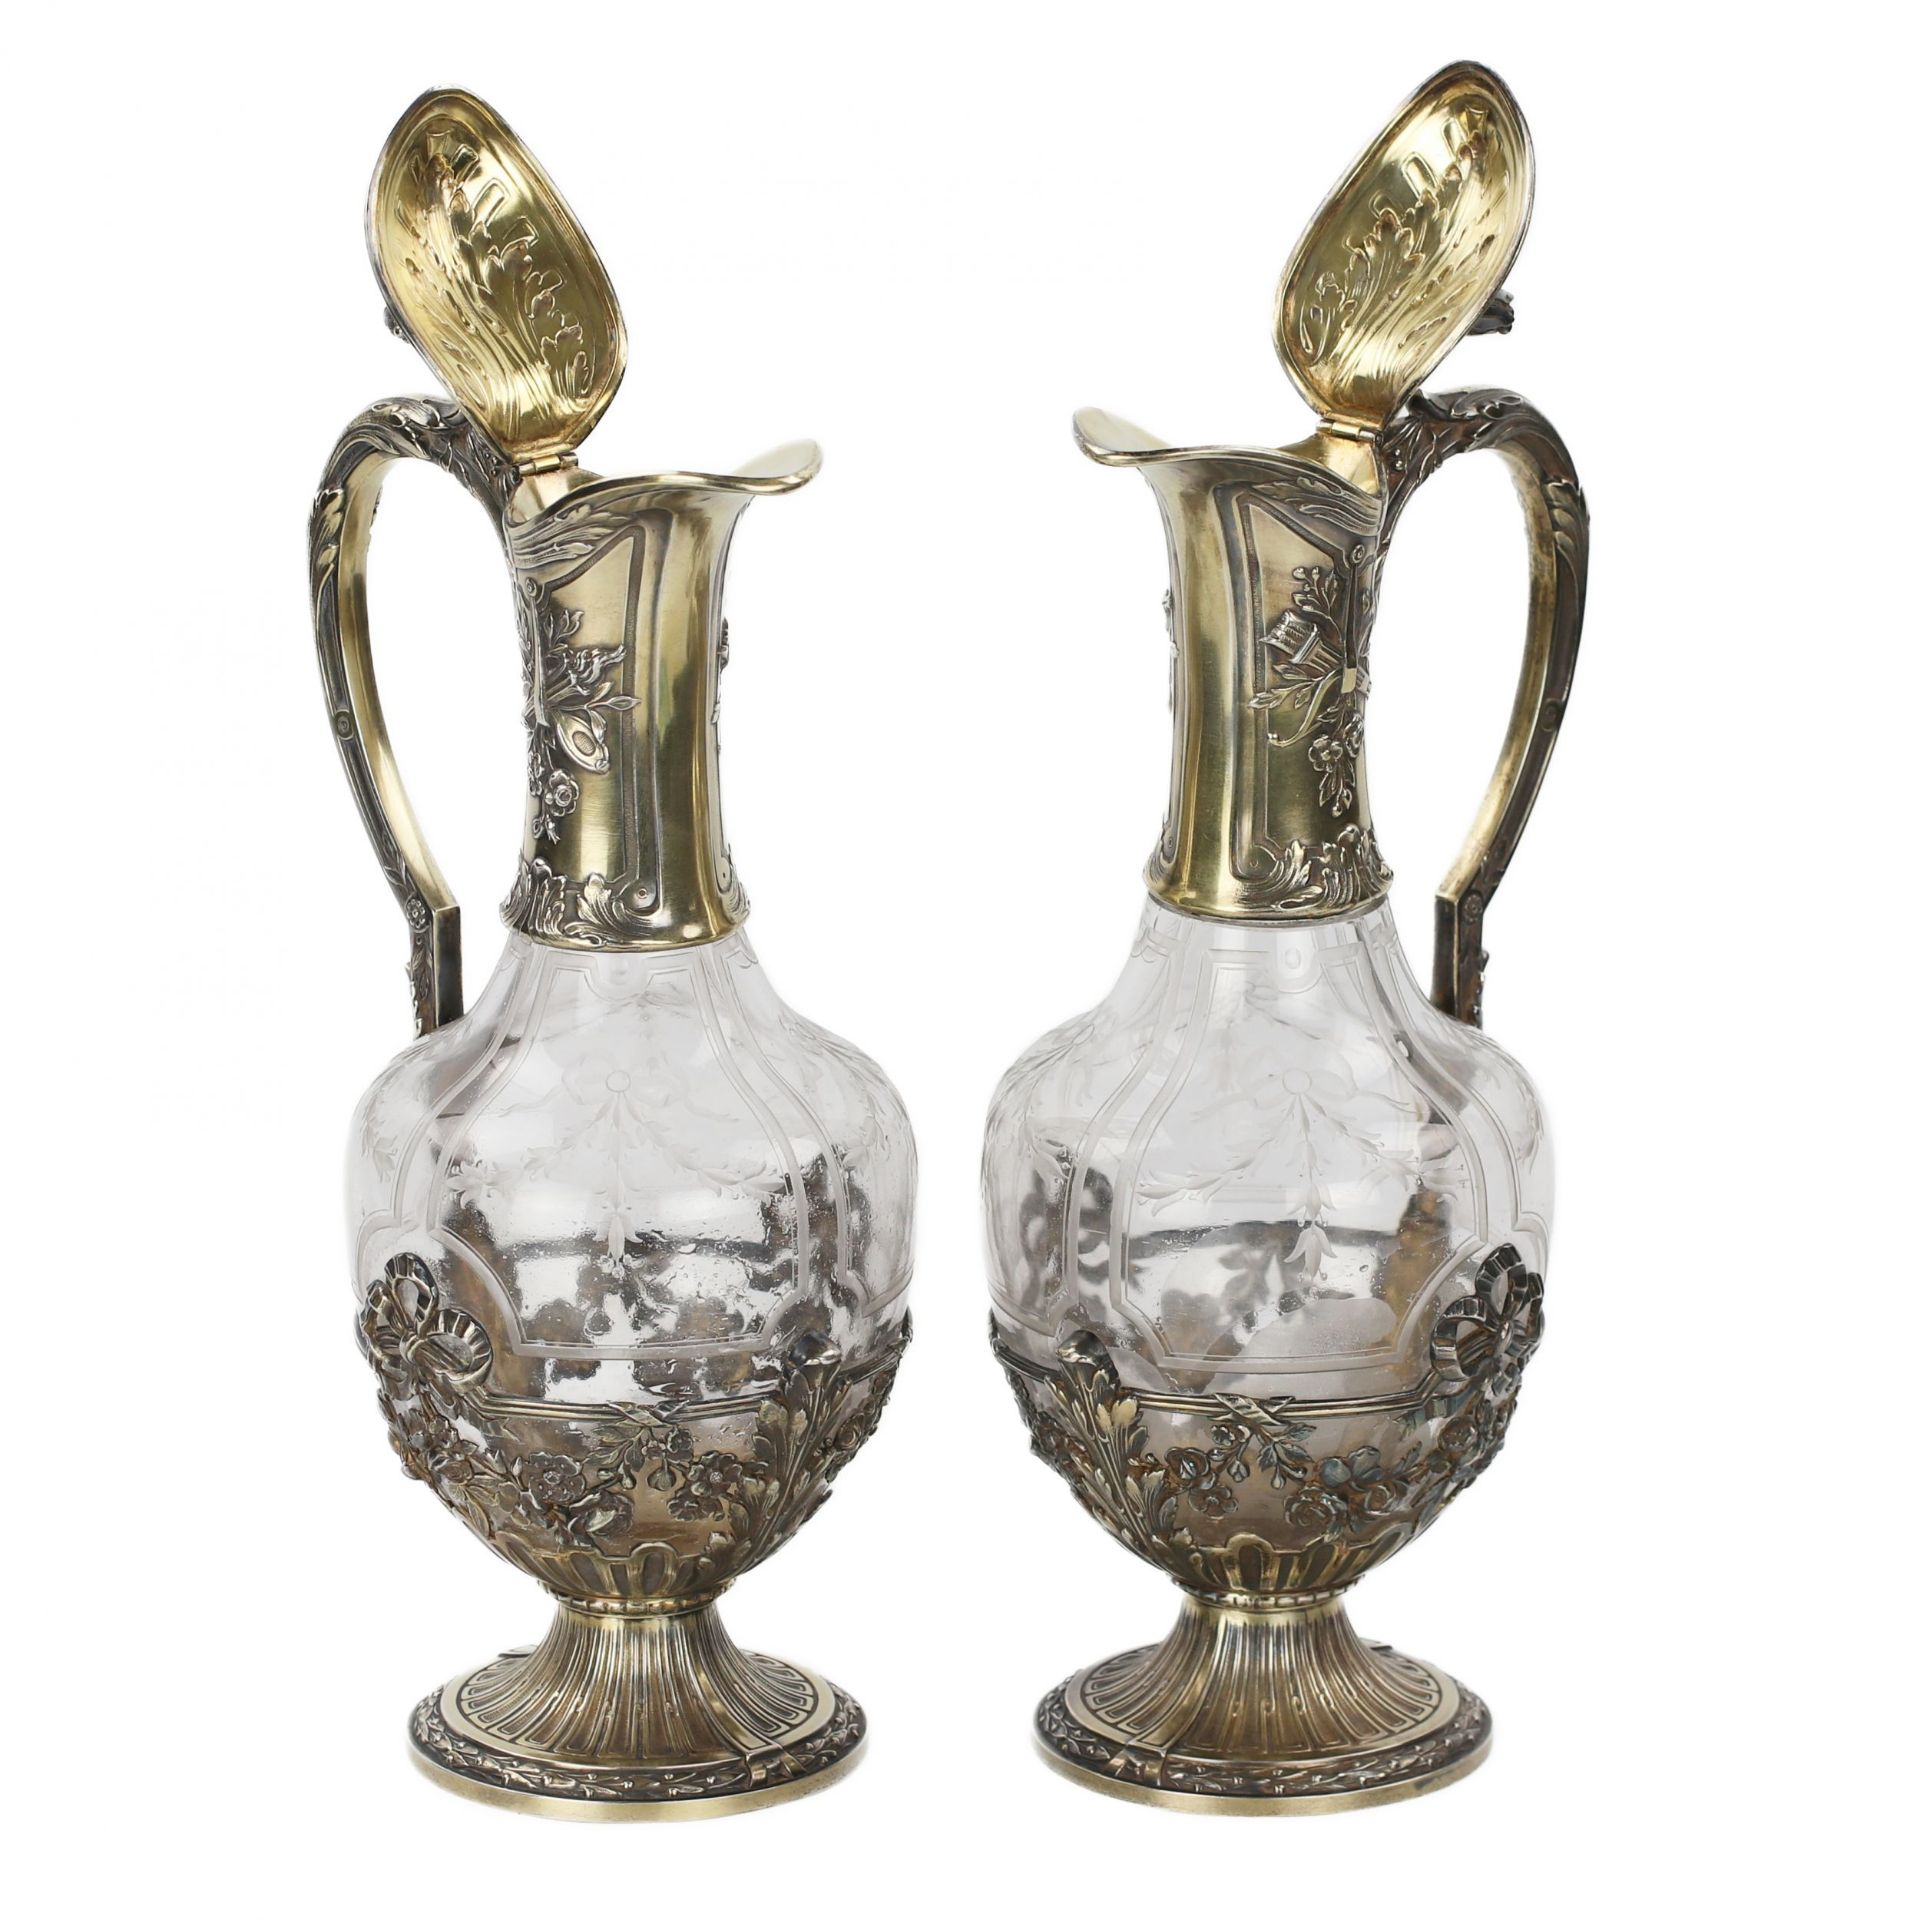 Pair of French glass wine jugs in silver from the late 19th century. - Image 5 of 9